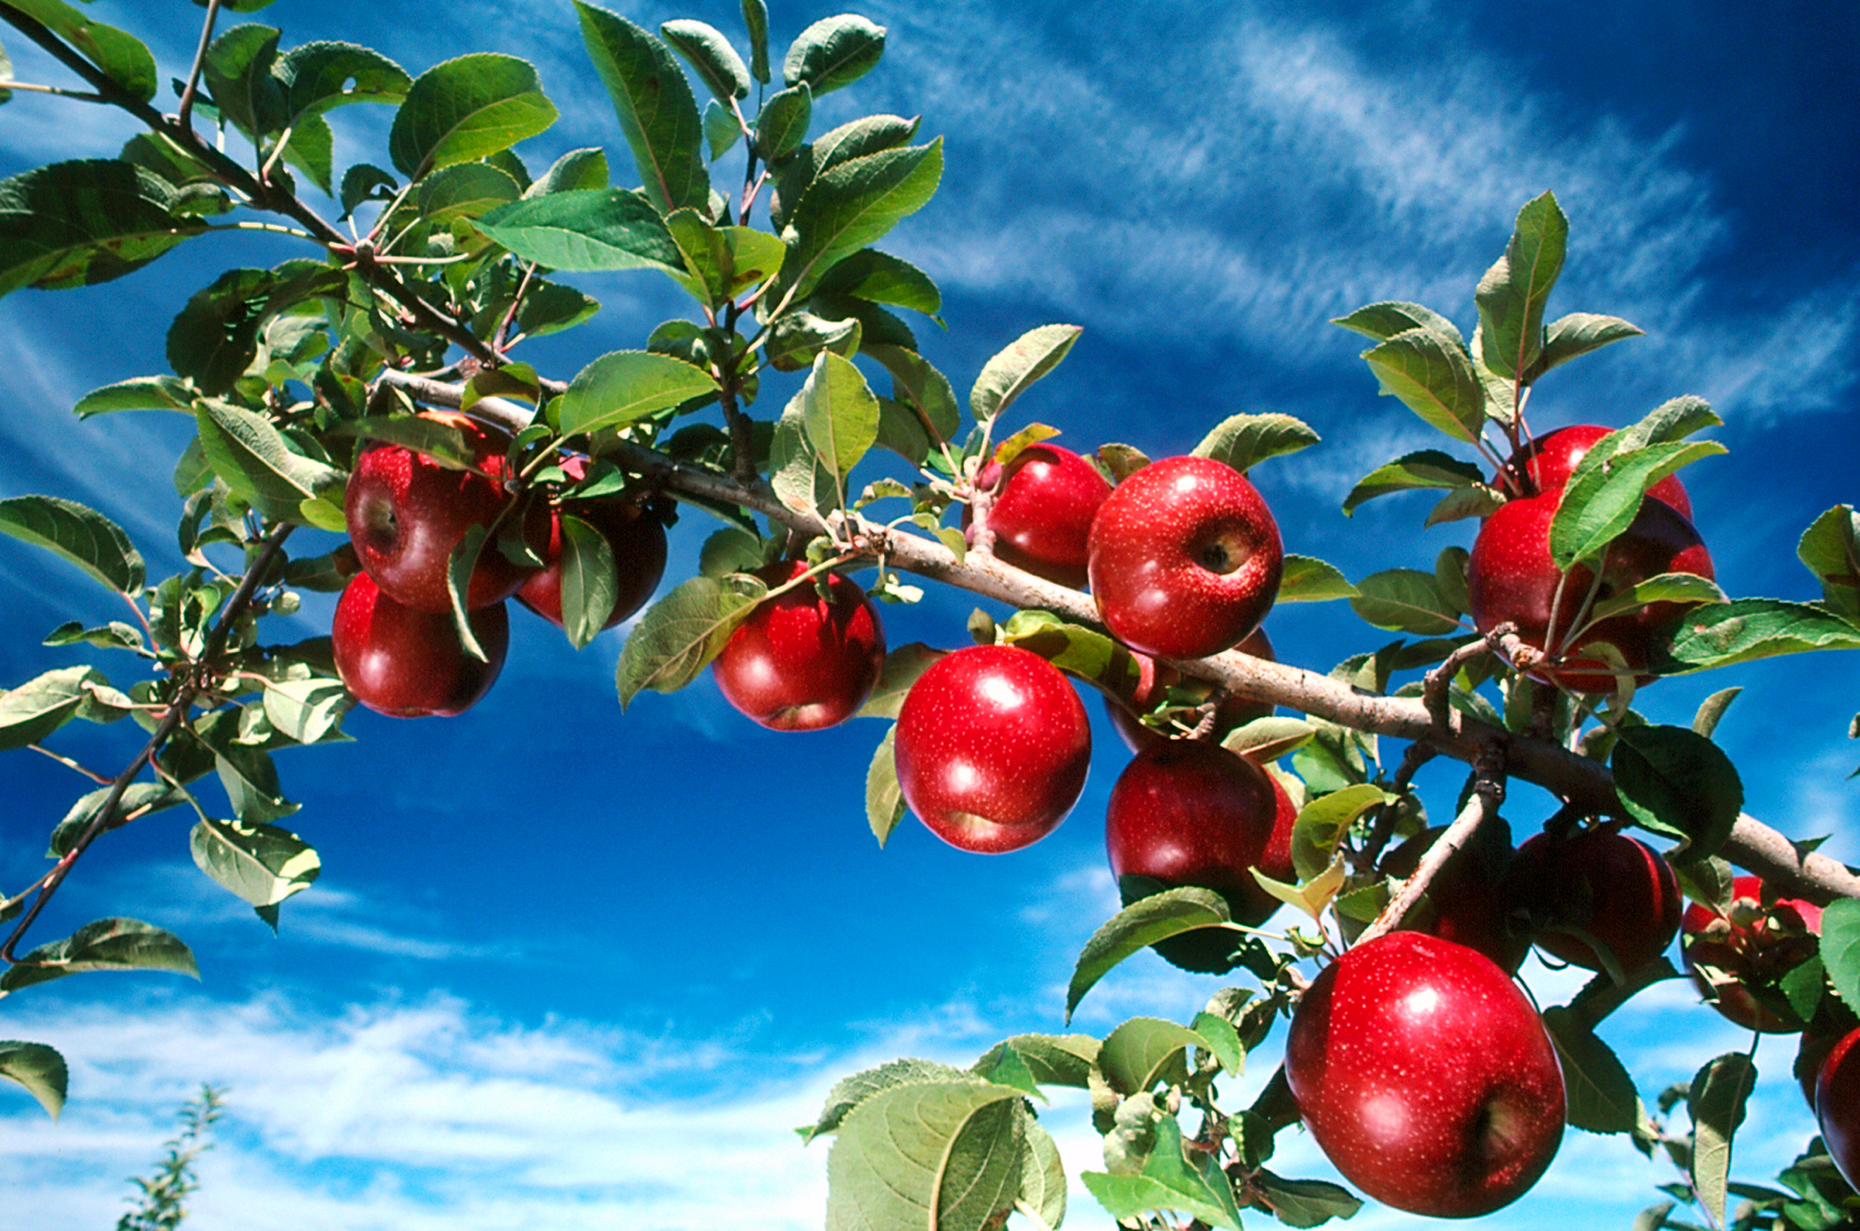 Fresh red apples on a tree in a Hudson River Valley, New York, orchard